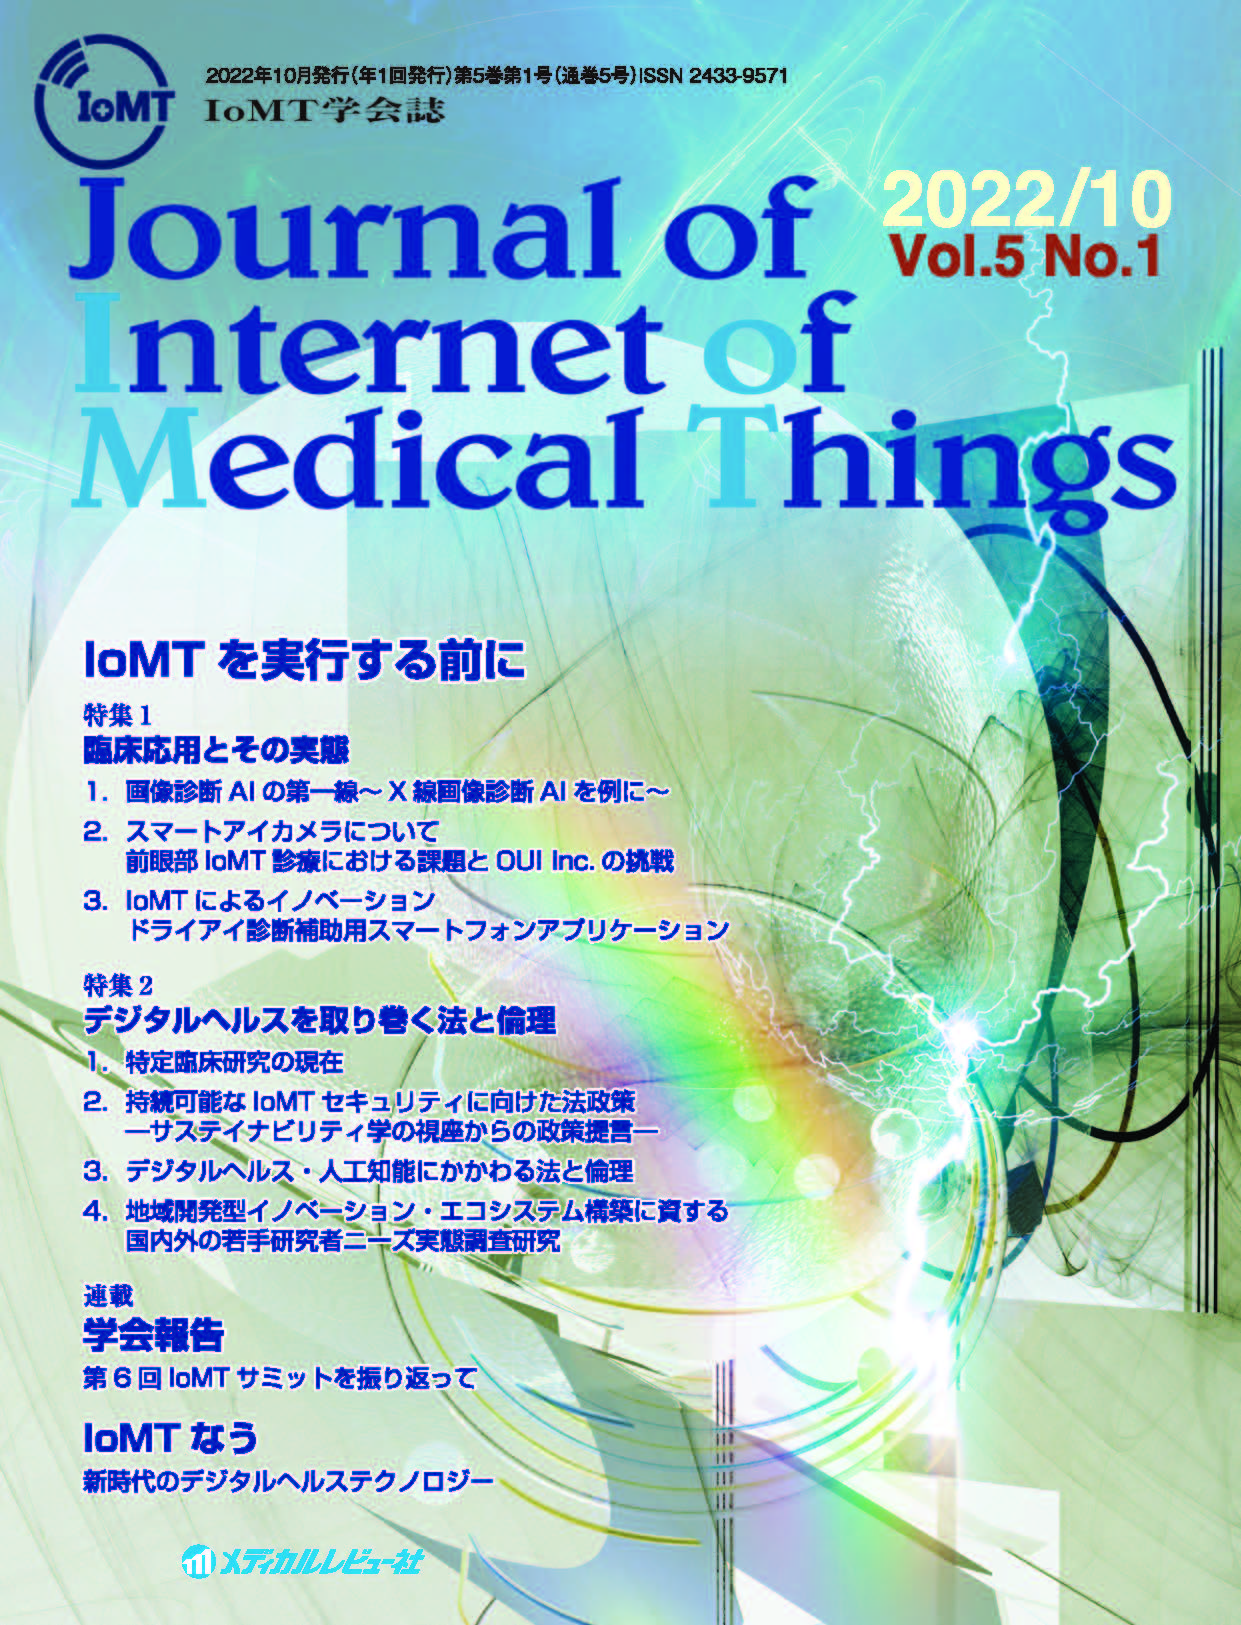 Journal of Internet of Medical Things 2022年10月号（Vol.5 No.1）